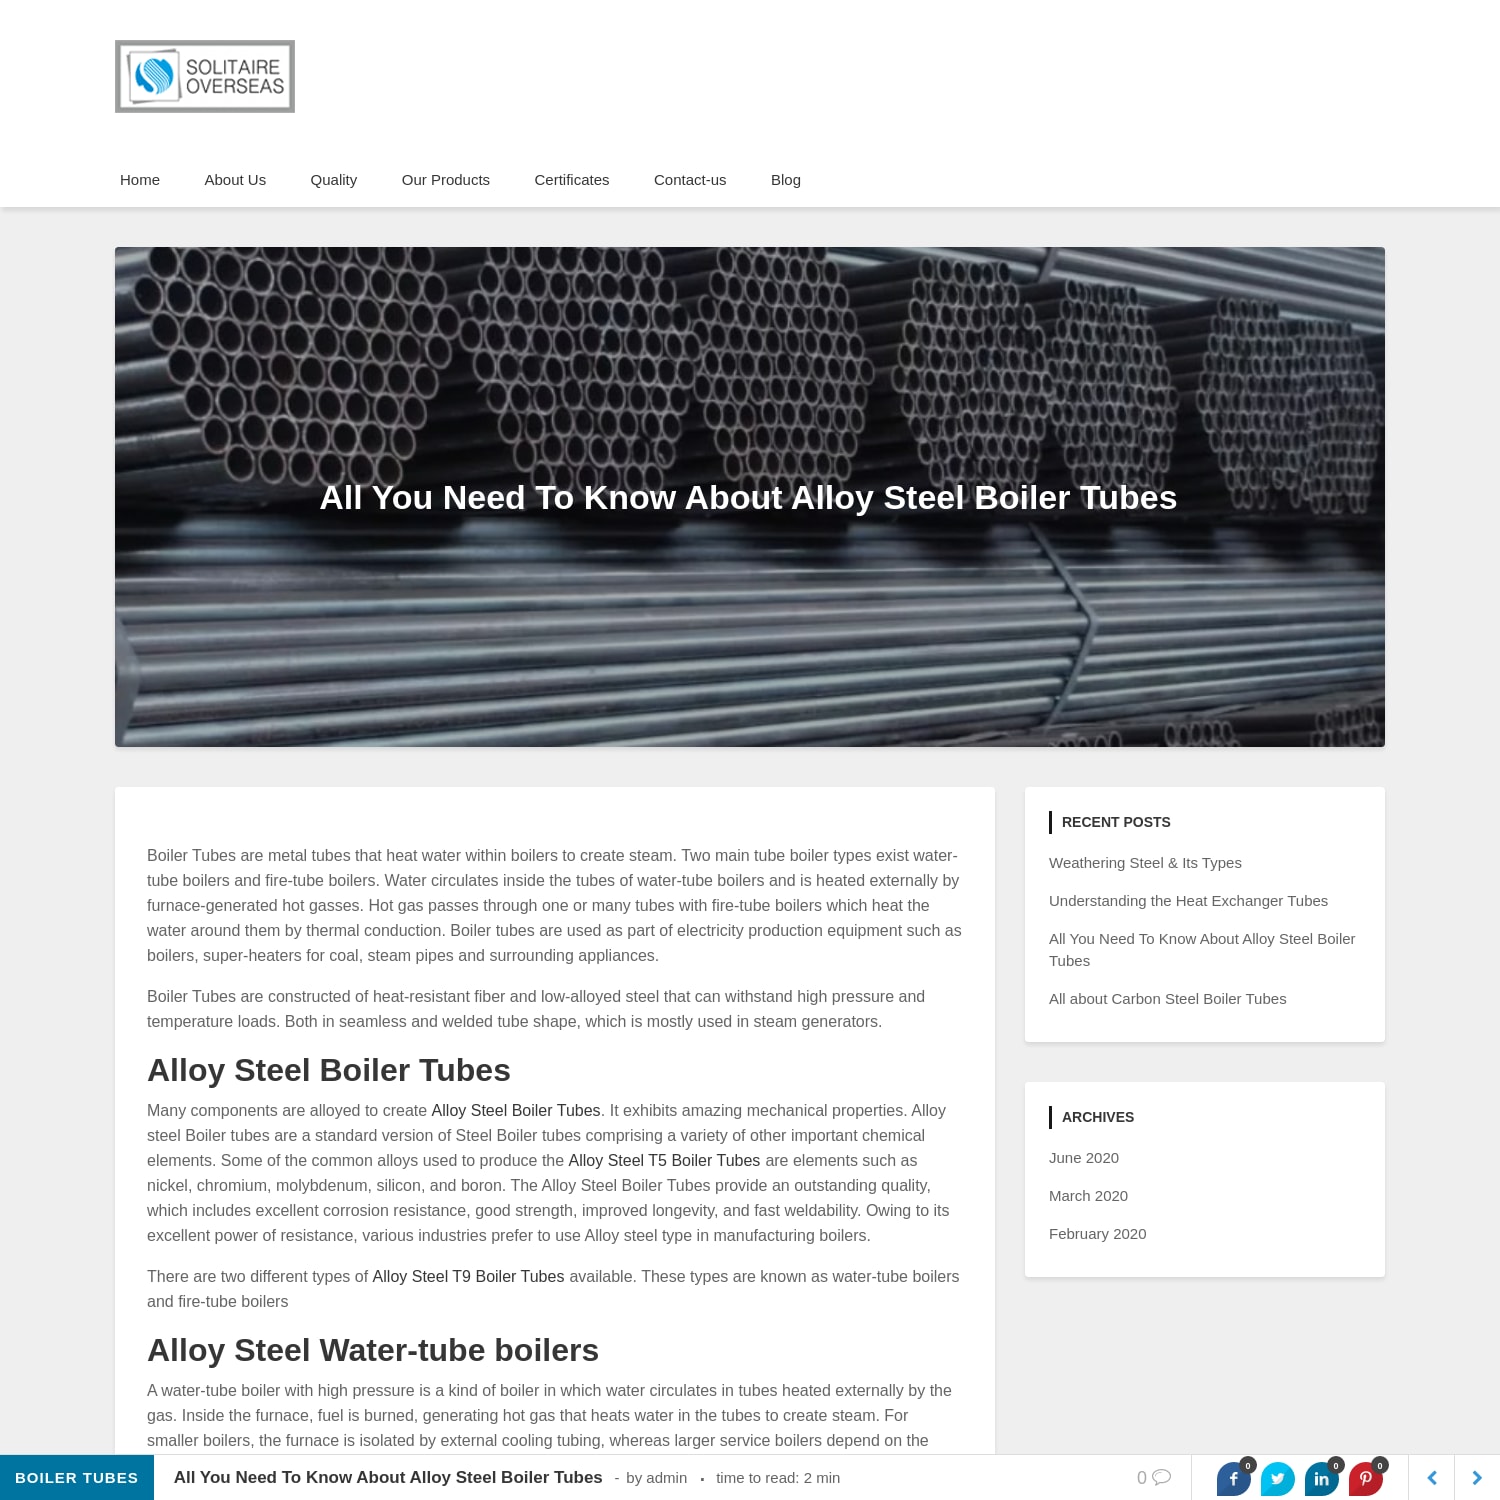 All You Need To Know About Alloy Steel Boiler Tubes - Solitaire Overseas Blog